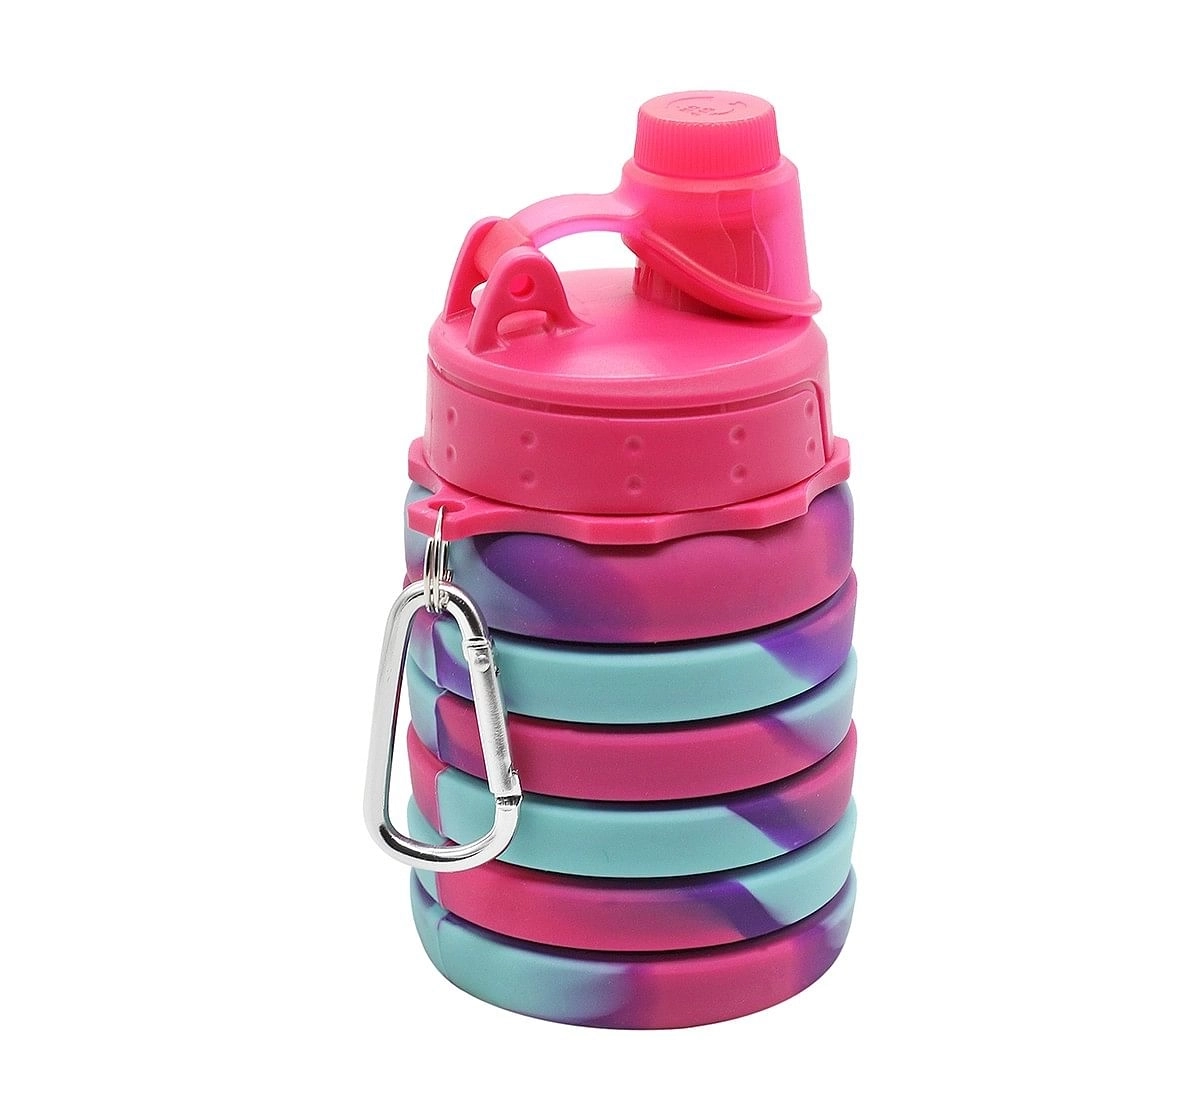 Hamster London Bendable Bottle with Carabiner Clip for Kids age 3Y+ (Pink)